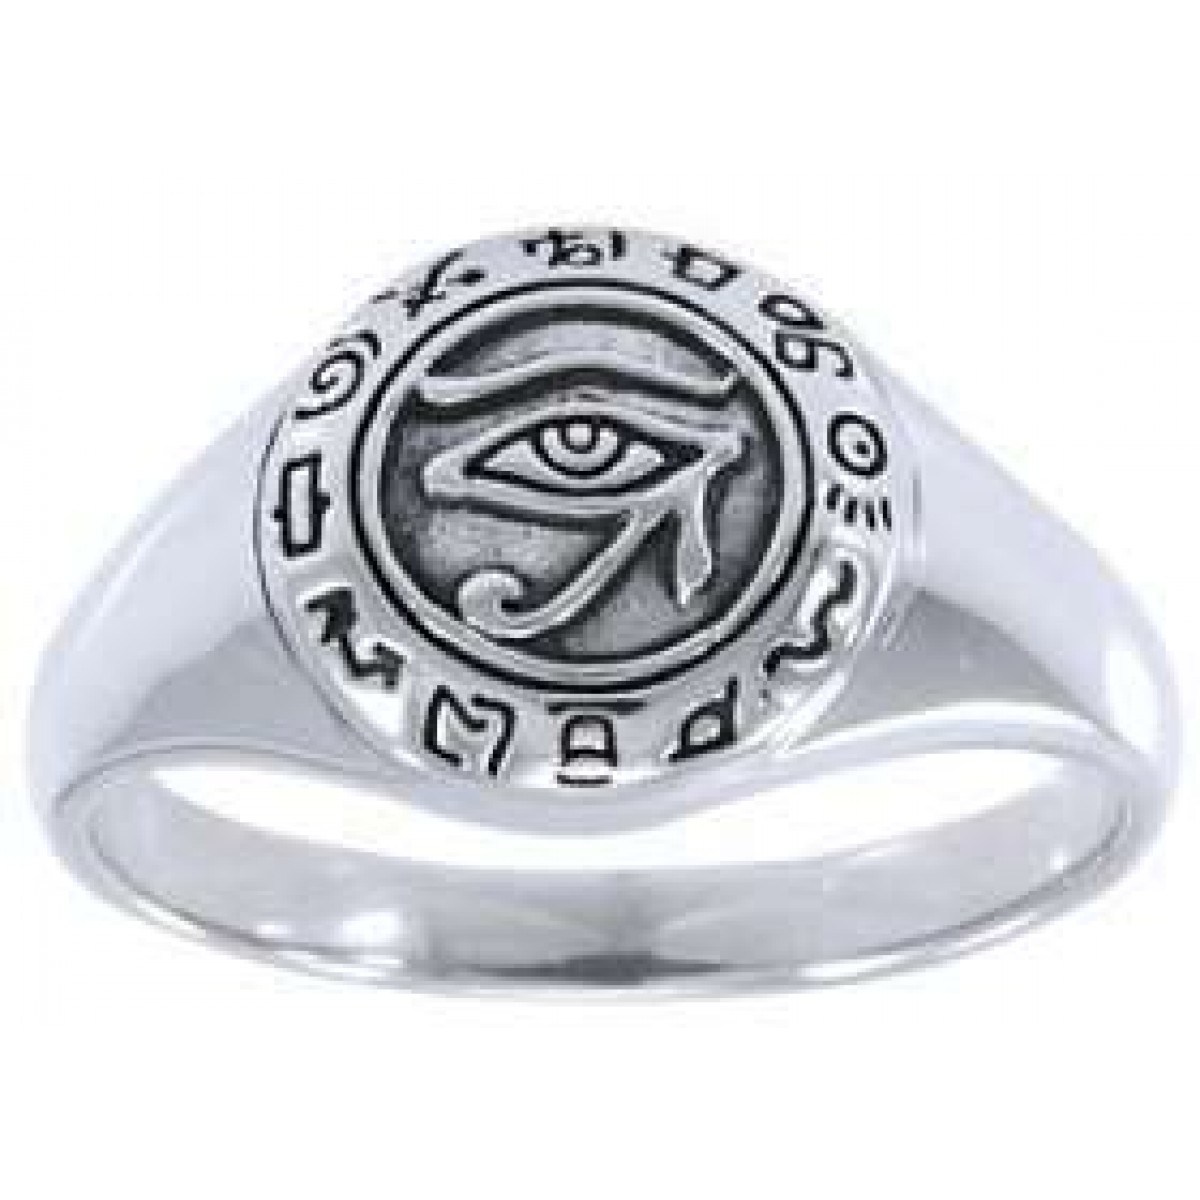 HZMAN Ancient Egyptian Ring for Men Women Stainless Steel Ankh Cross Eye of  Horus Ring Egypt Symbol Rings Jewelry Gift (Silver,7)|Amazon.com